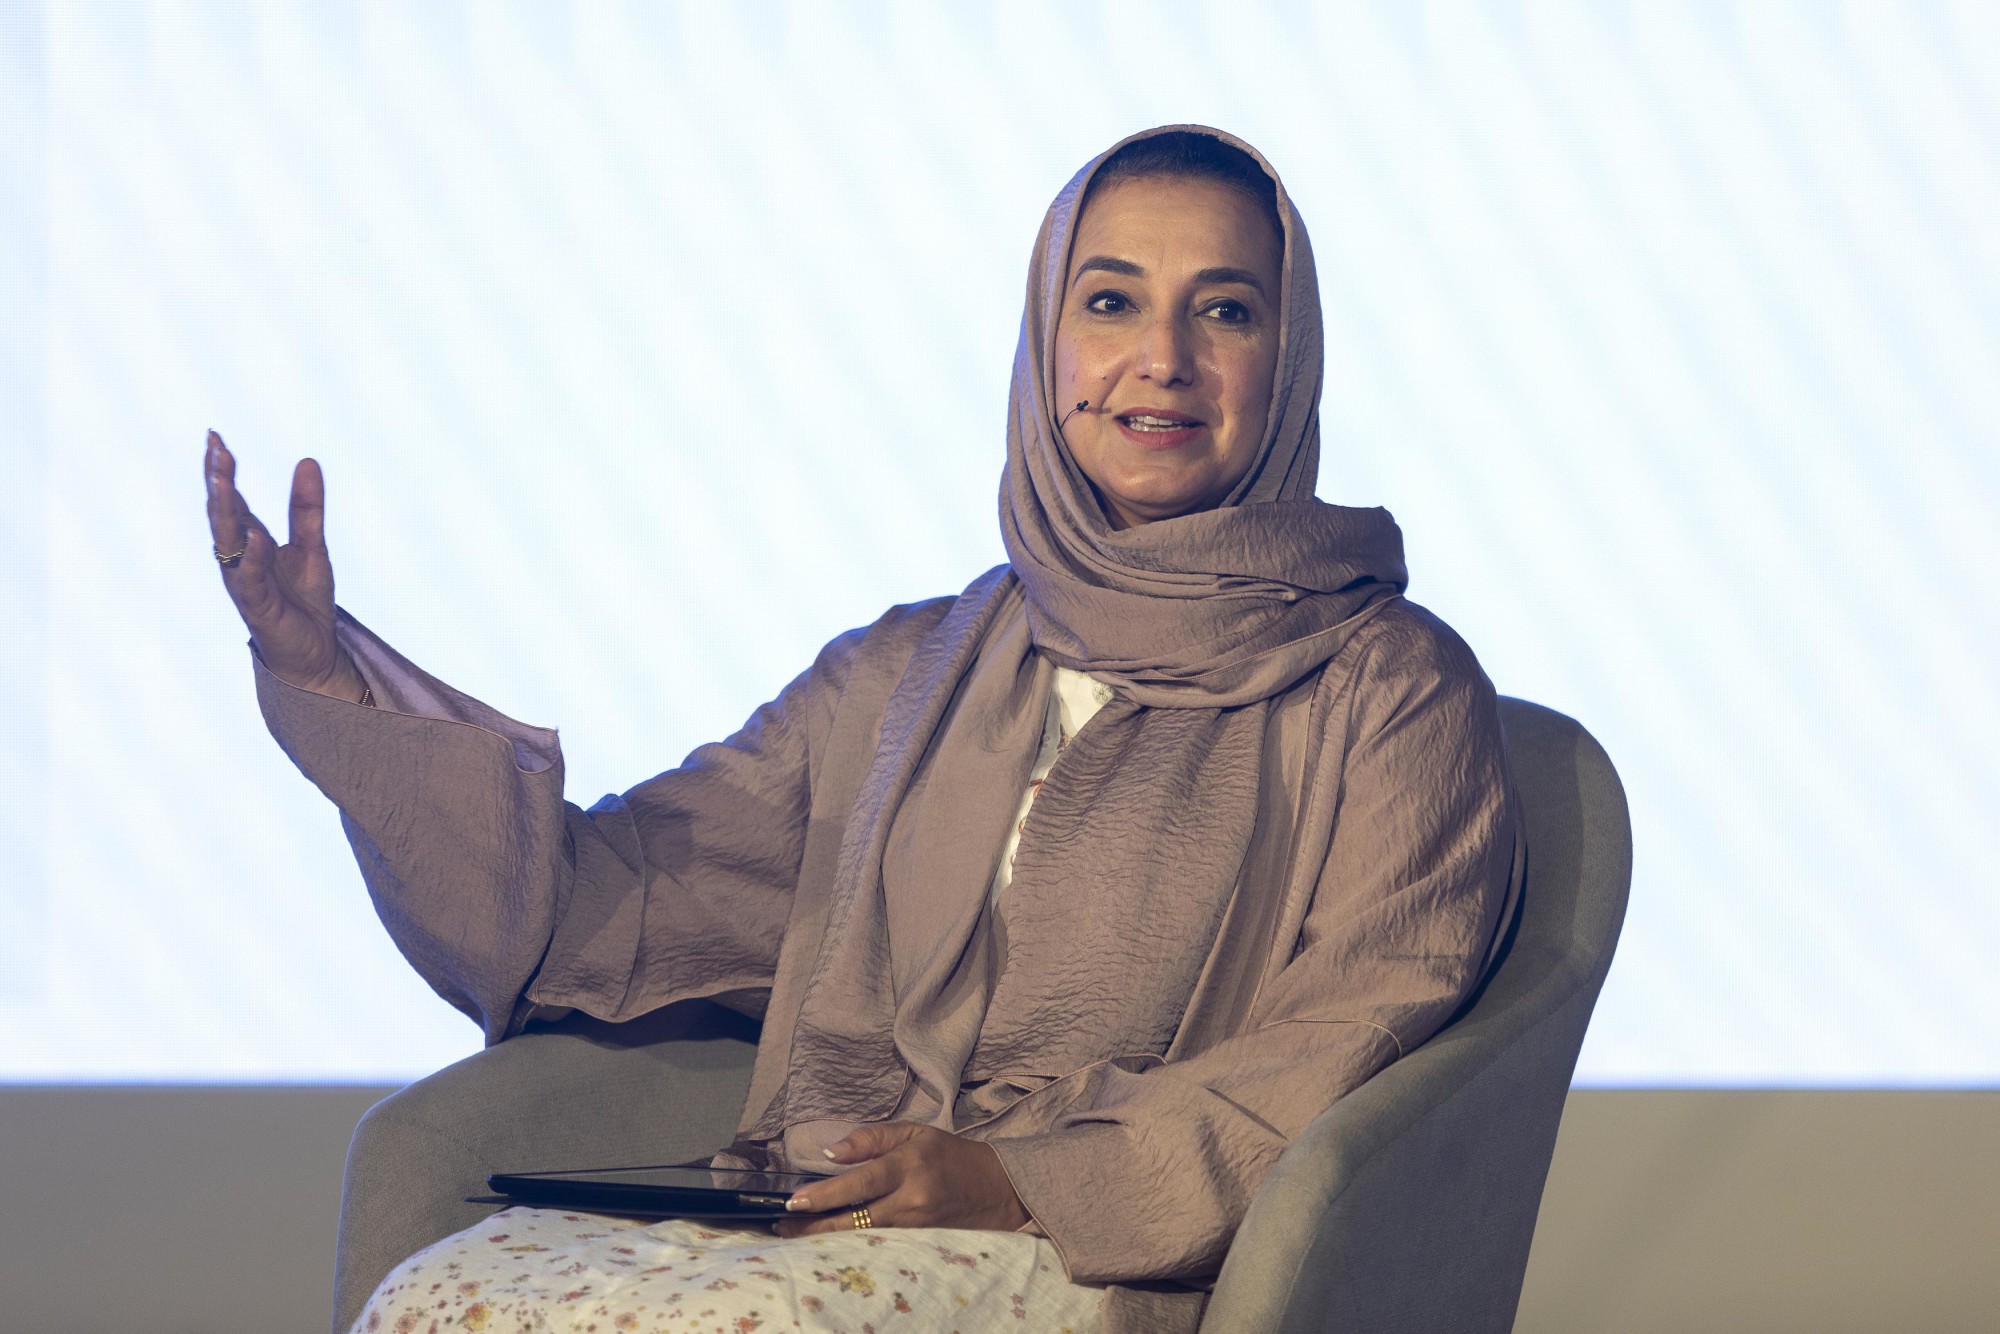 Her Excellency Dr Nawal Al-Hosany, Permanent Representative of the UAE to the International Renewable Energy Agency (IRENA) speaks during the Water-Food-Energy Summit at Nexus for People and Planet m34598